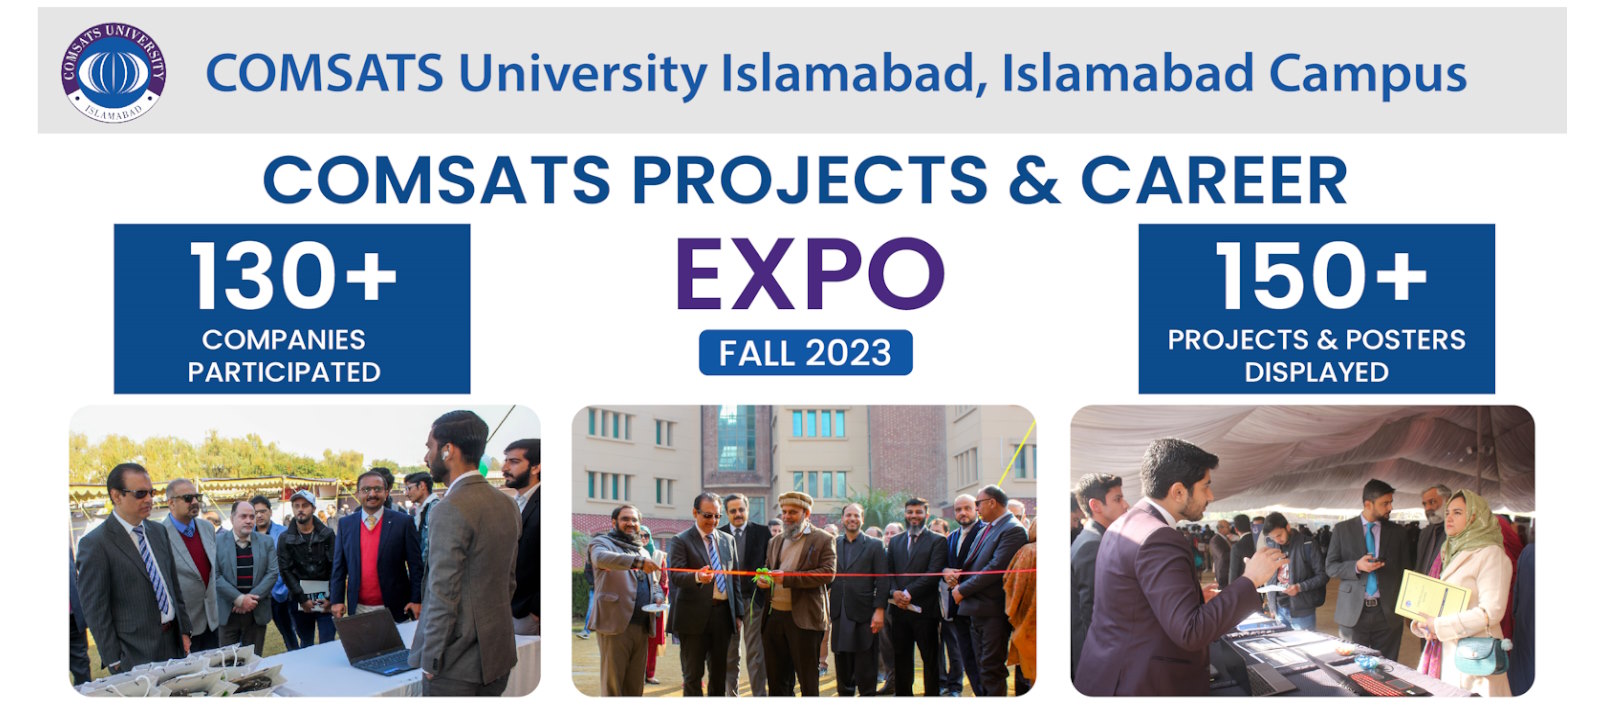 COMSATS Islamabad campus Projects & Career Expo, Fall 2023